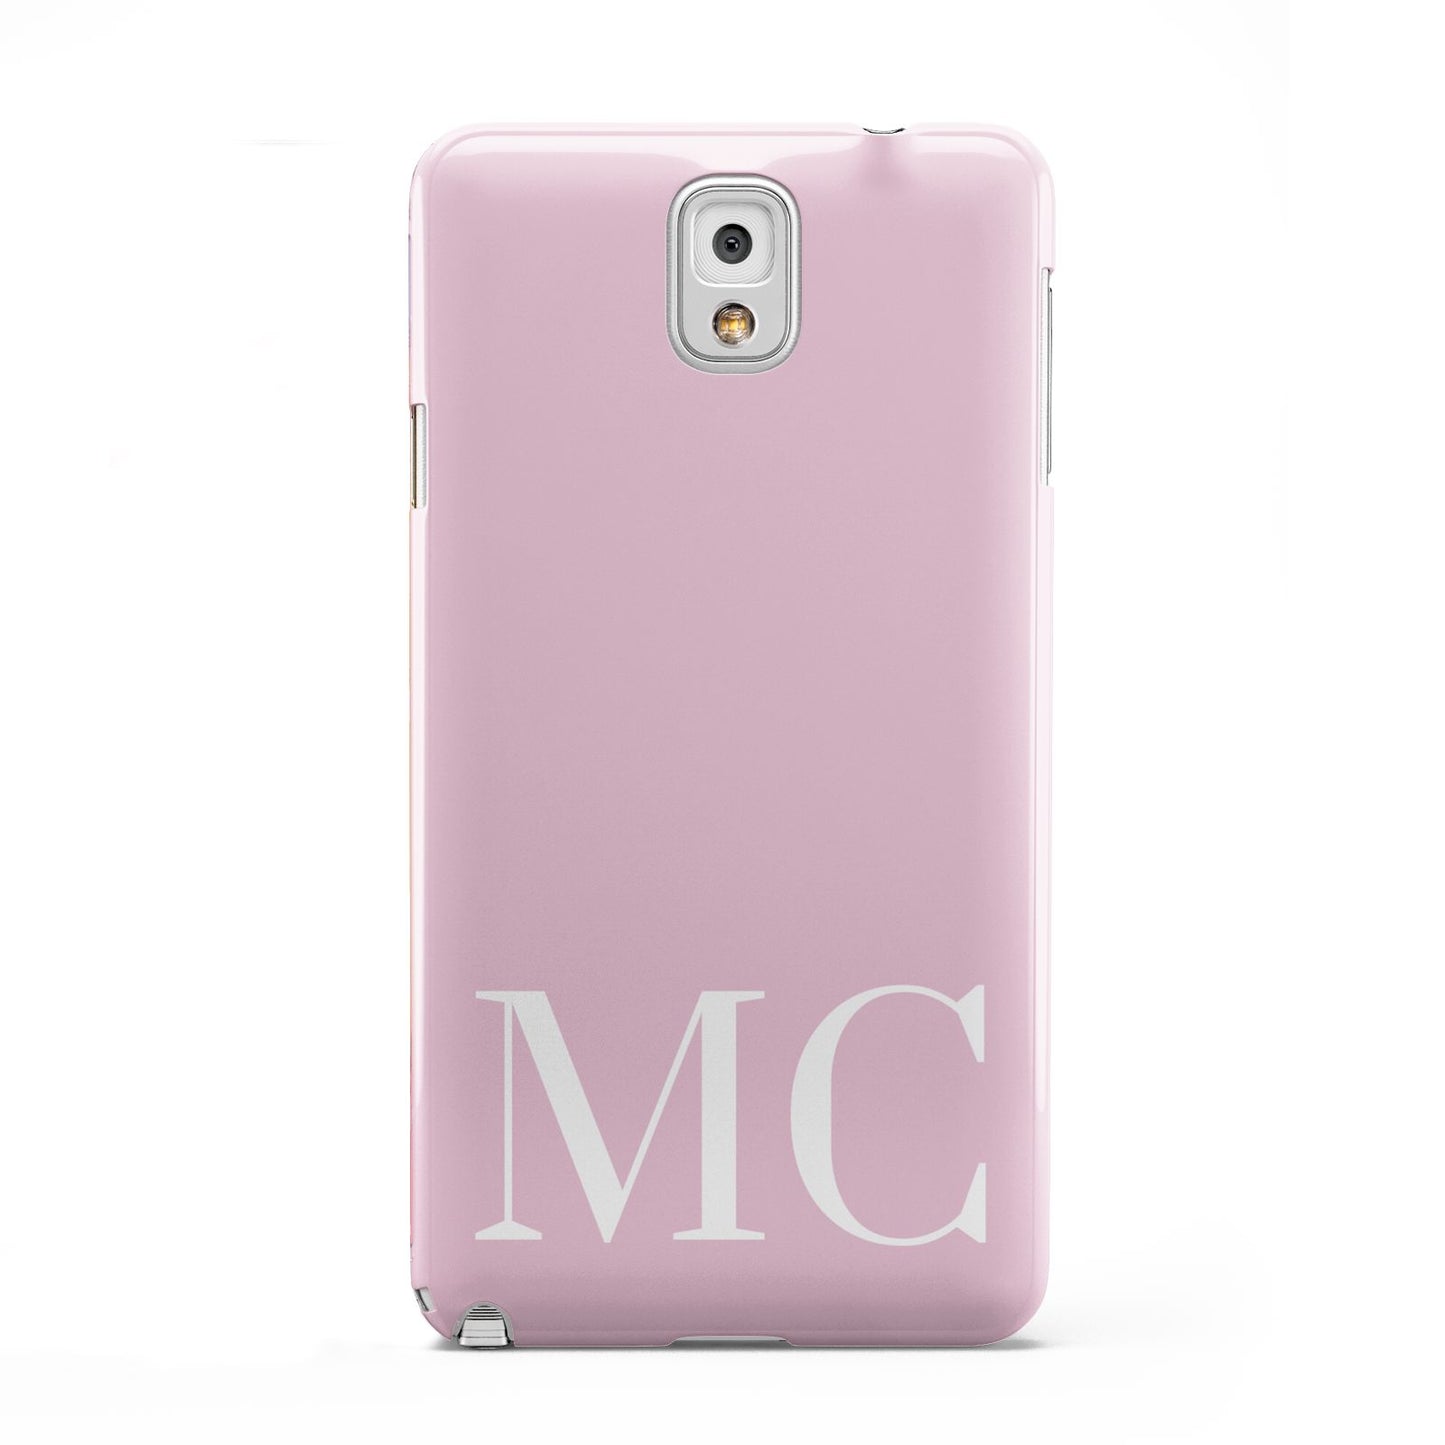 Initials Personalised 2 Samsung Galaxy Note 3 Case